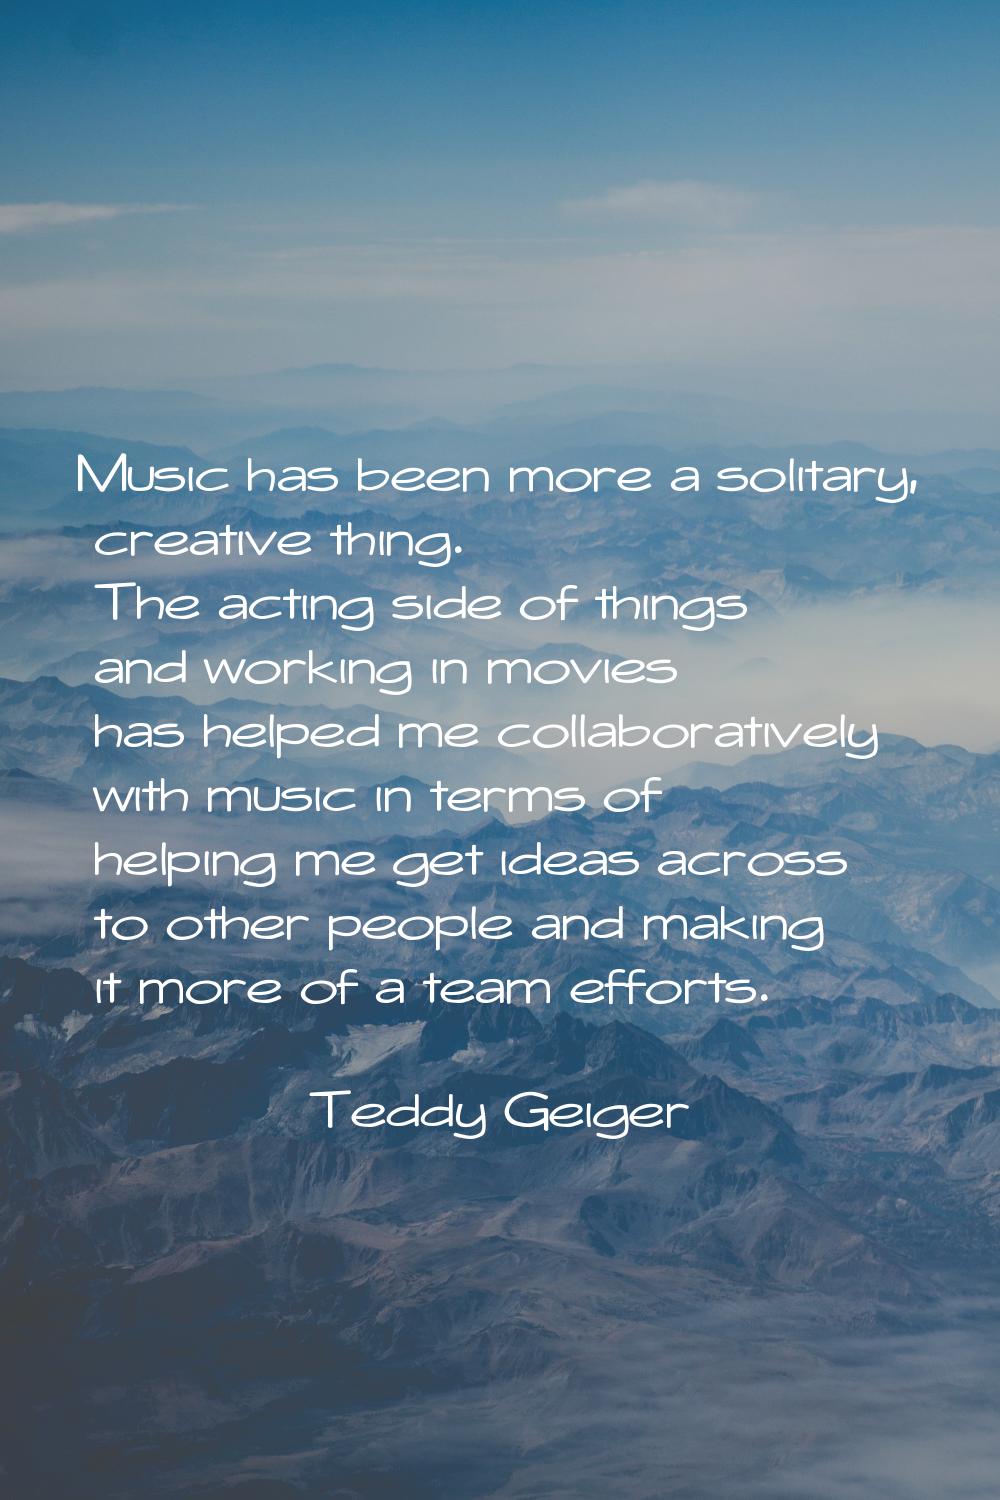 Music has been more a solitary, creative thing. The acting side of things and working in movies has